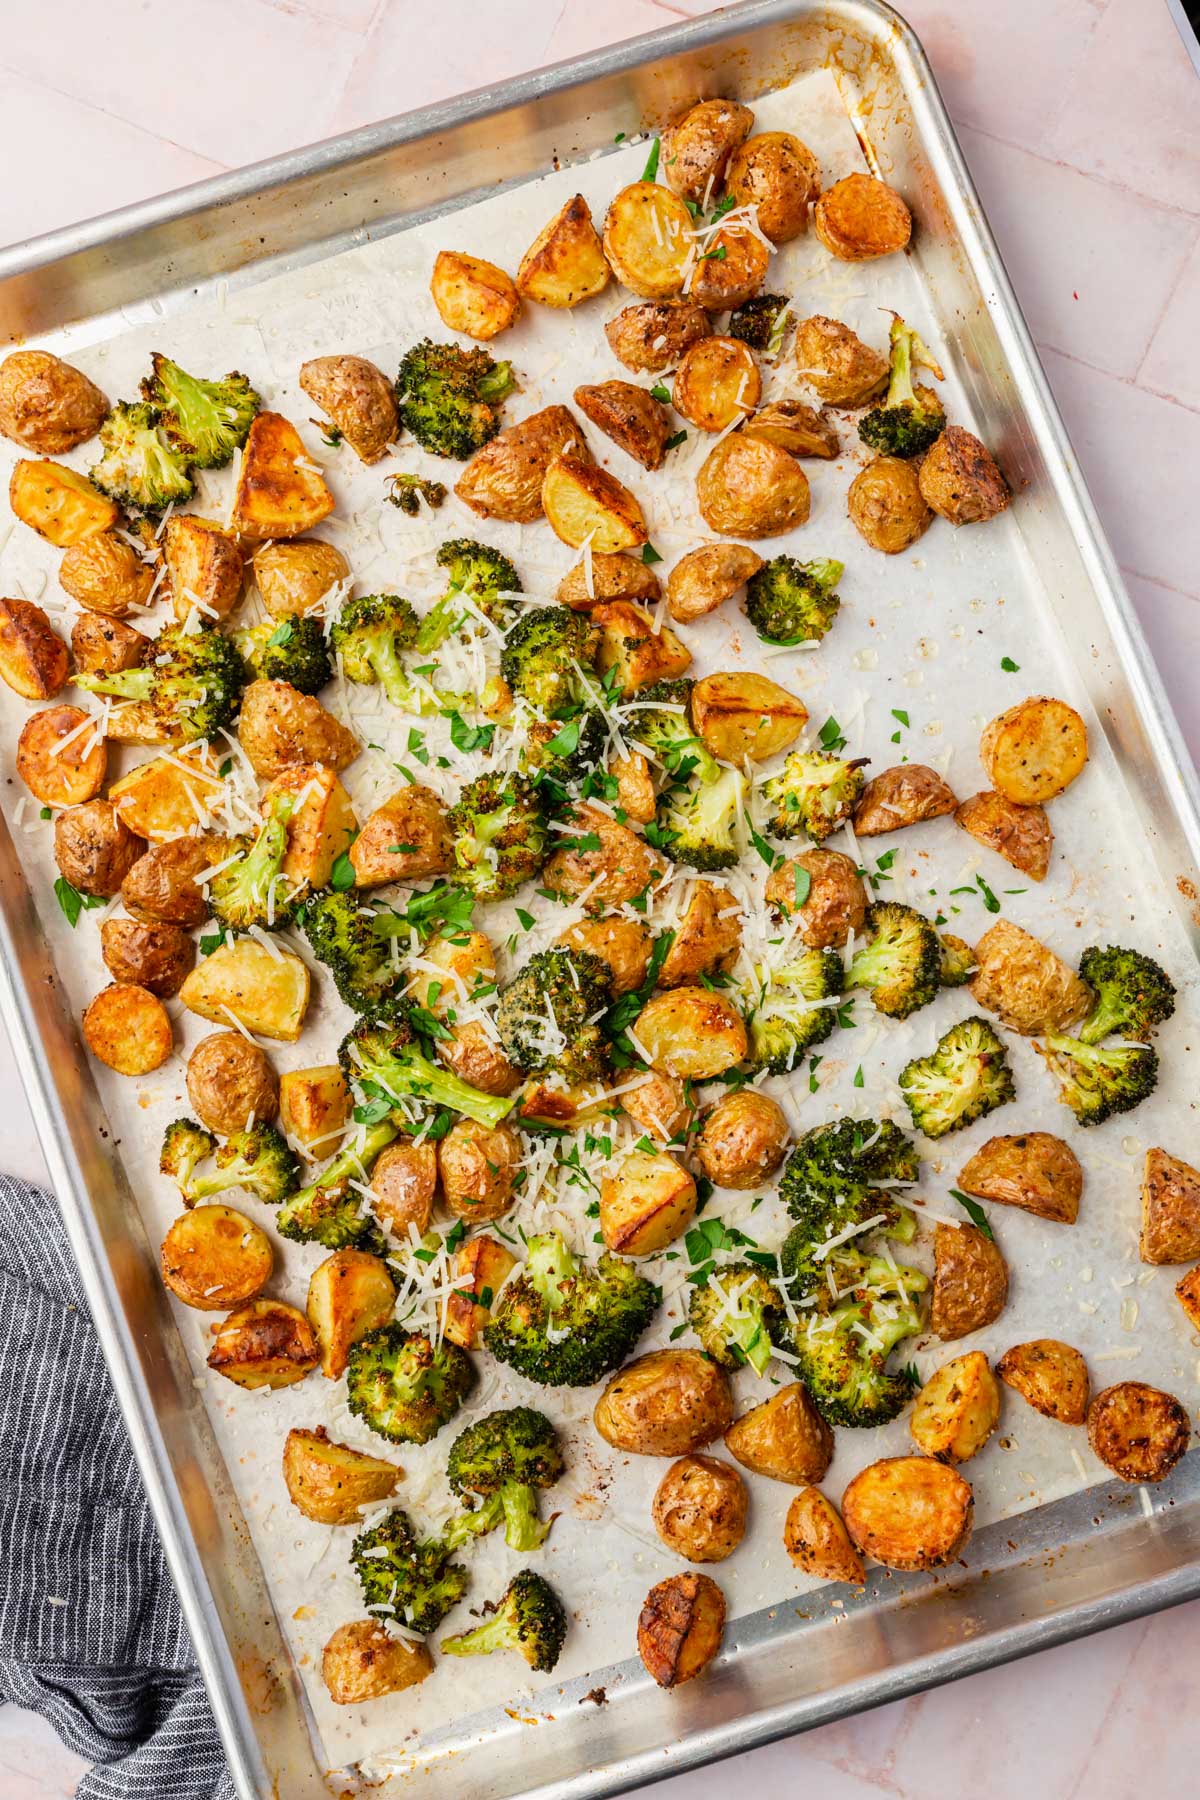 A sheet pan with roasted broccoli and potatoes topped with shredded parmesan and chopped parsley.